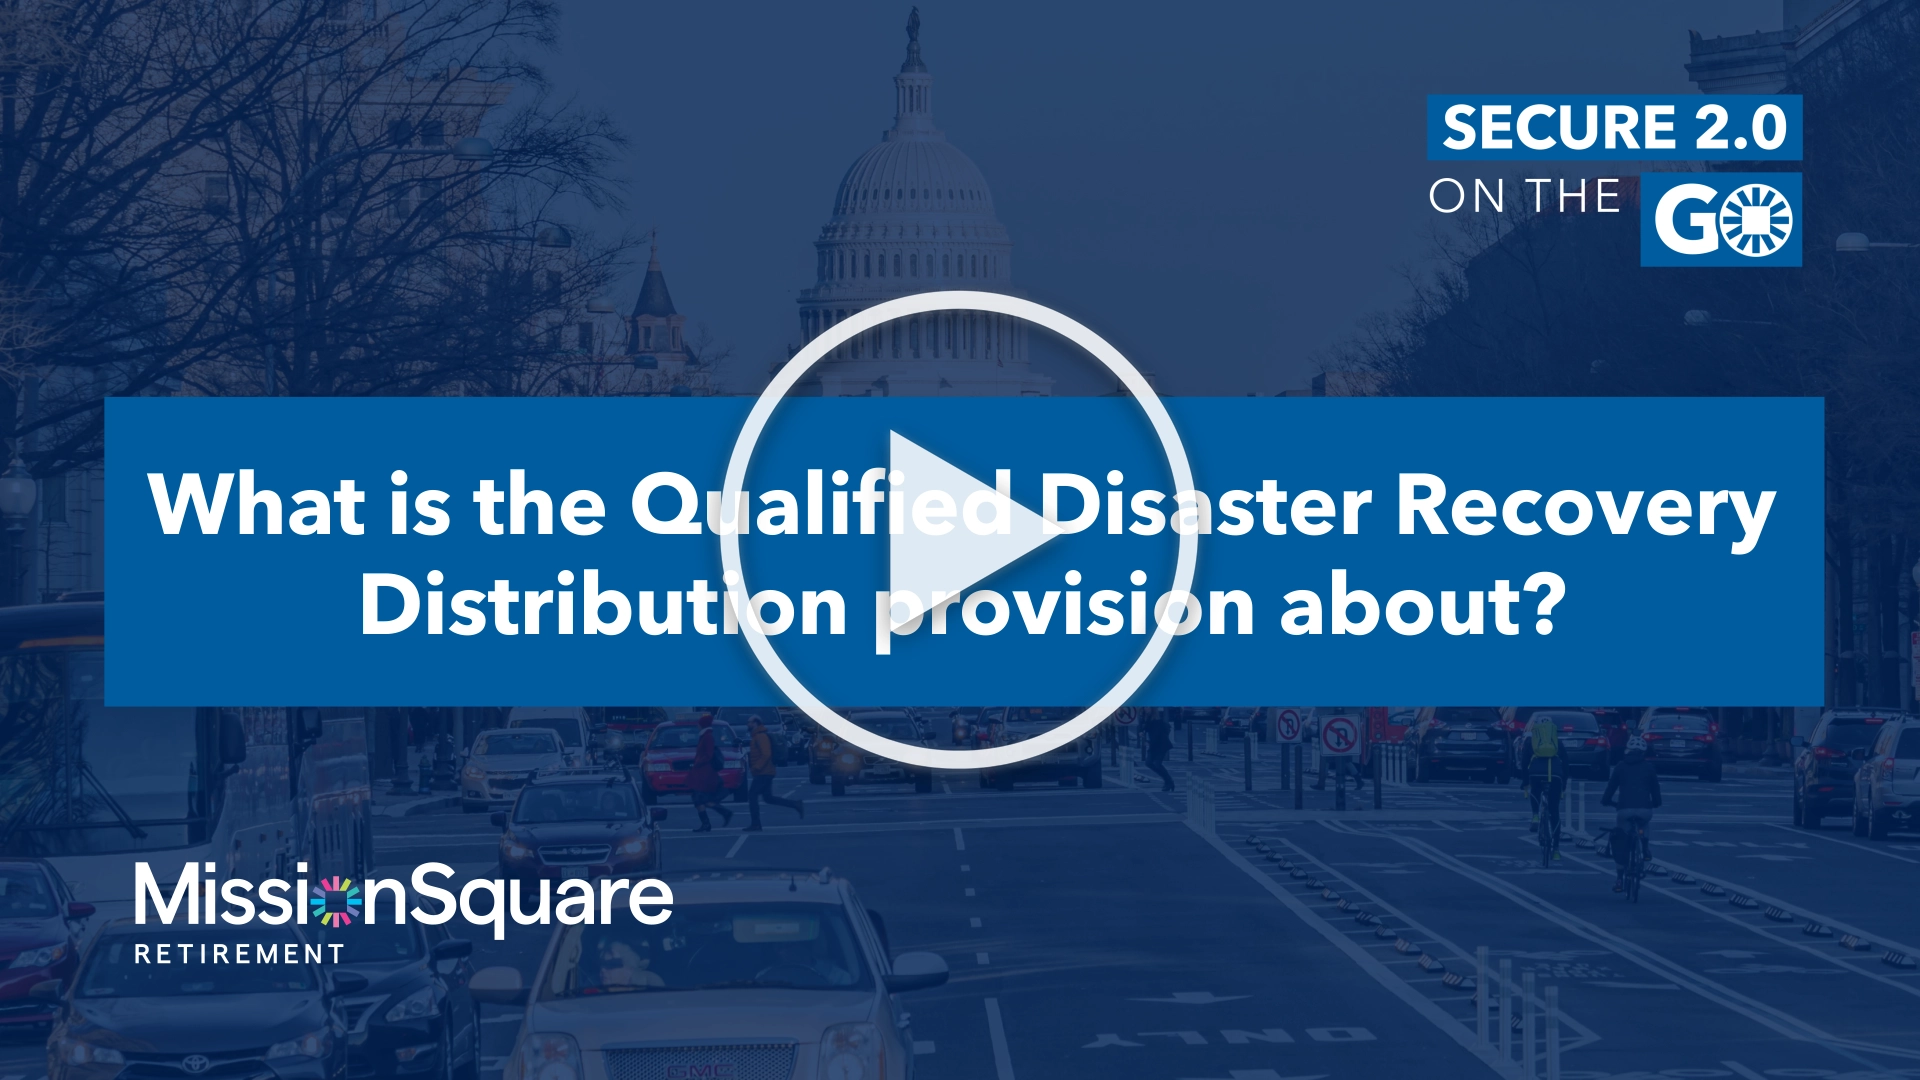 What is the Qualified Disaster Recovery Distribution provision